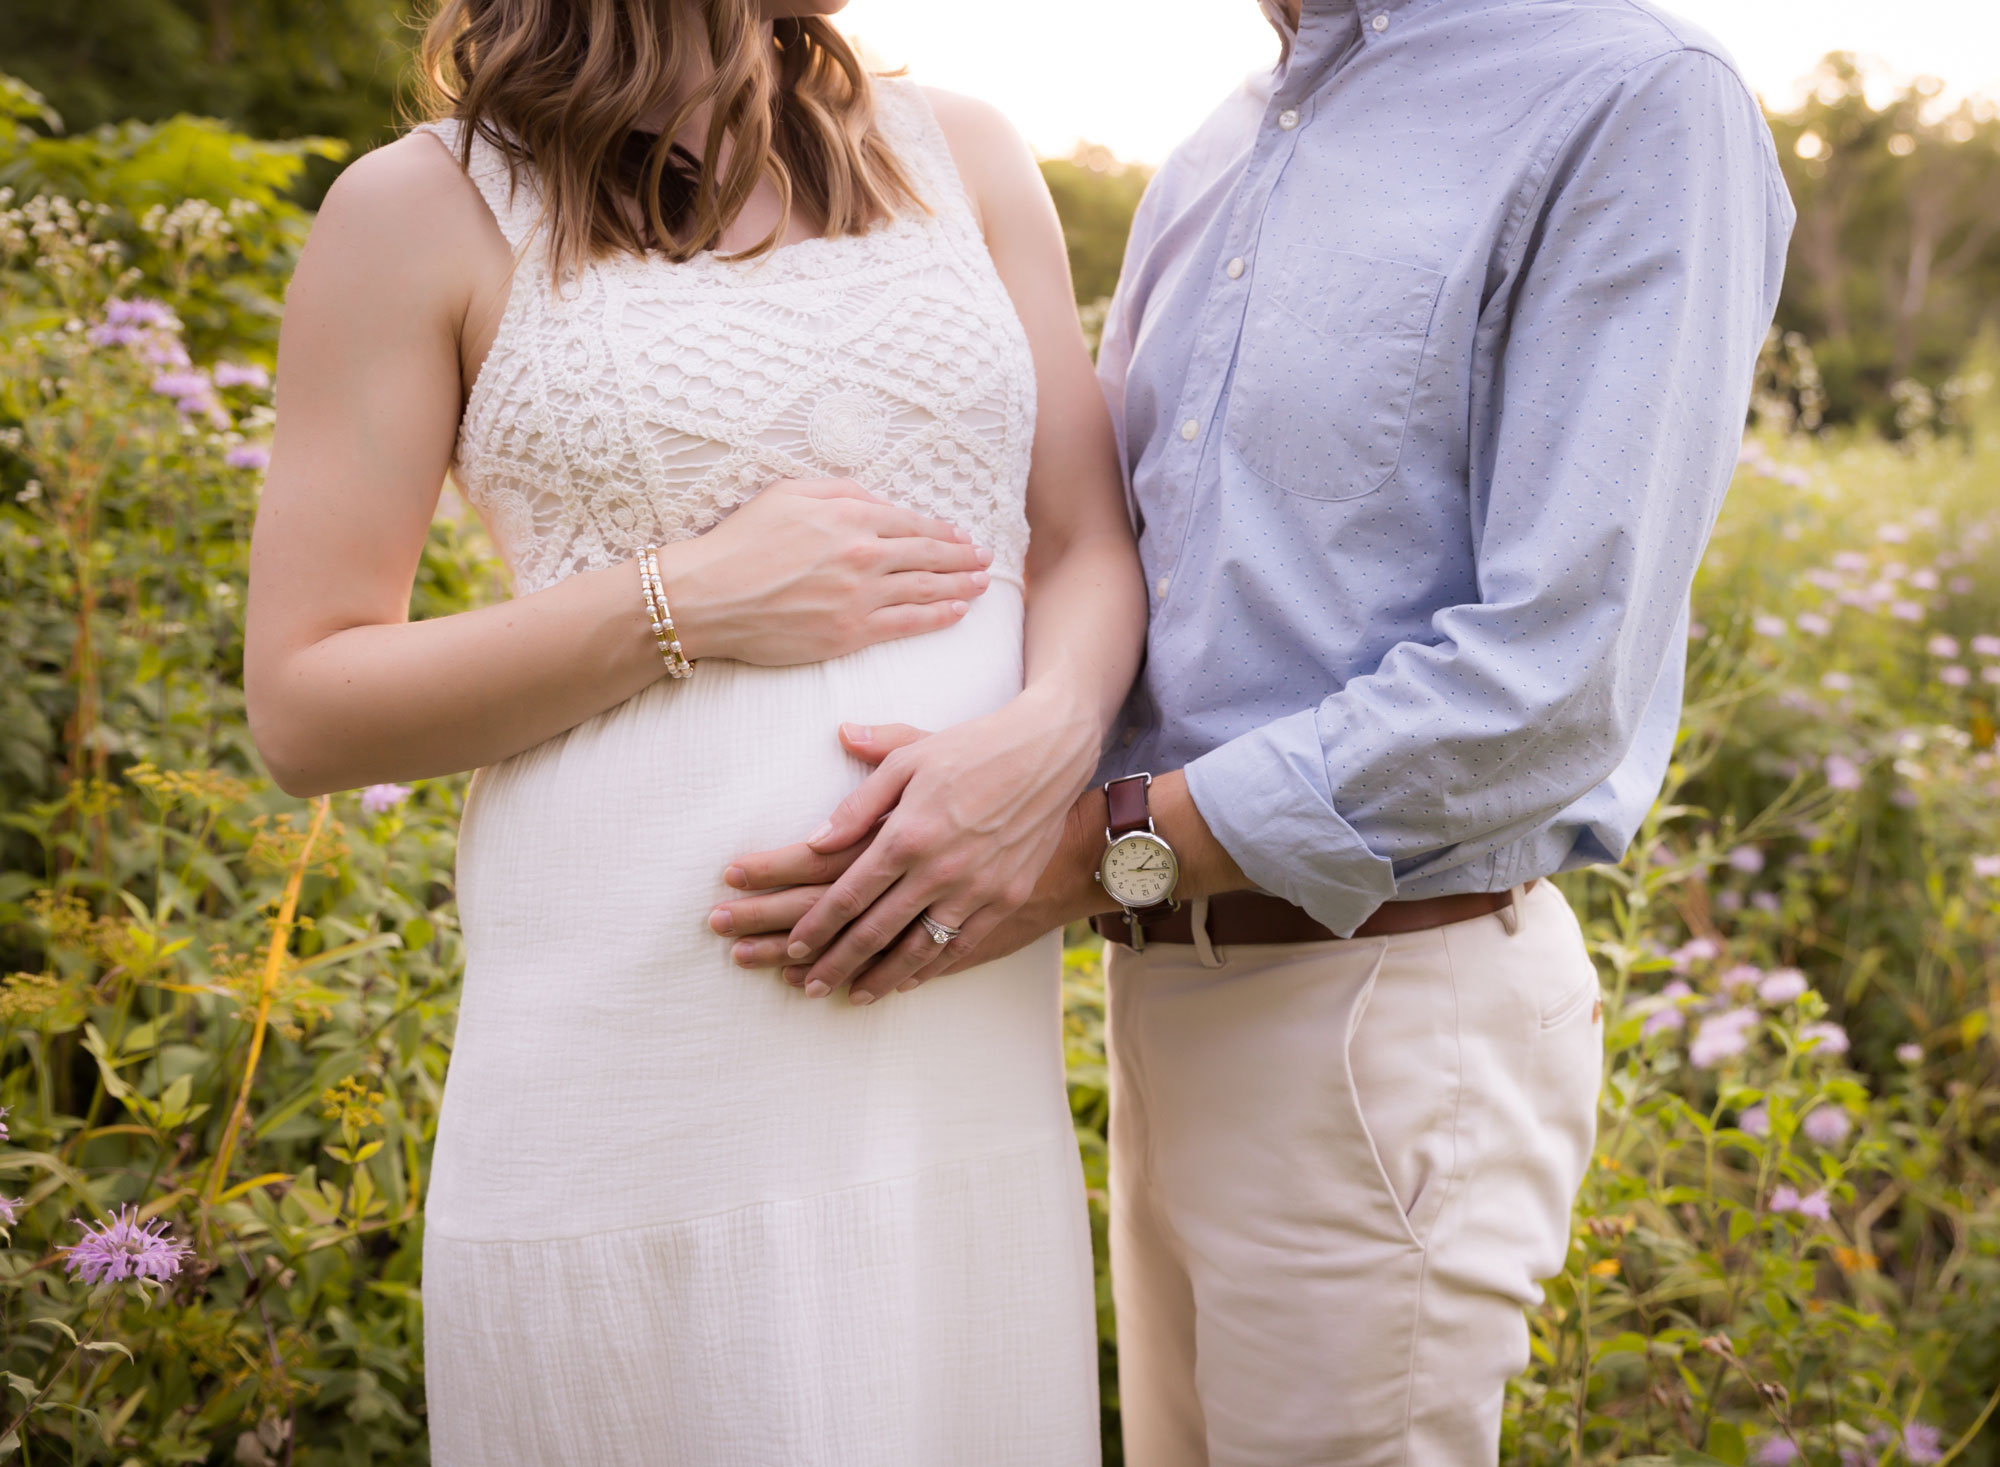 pregnant couple embracing hands on belly